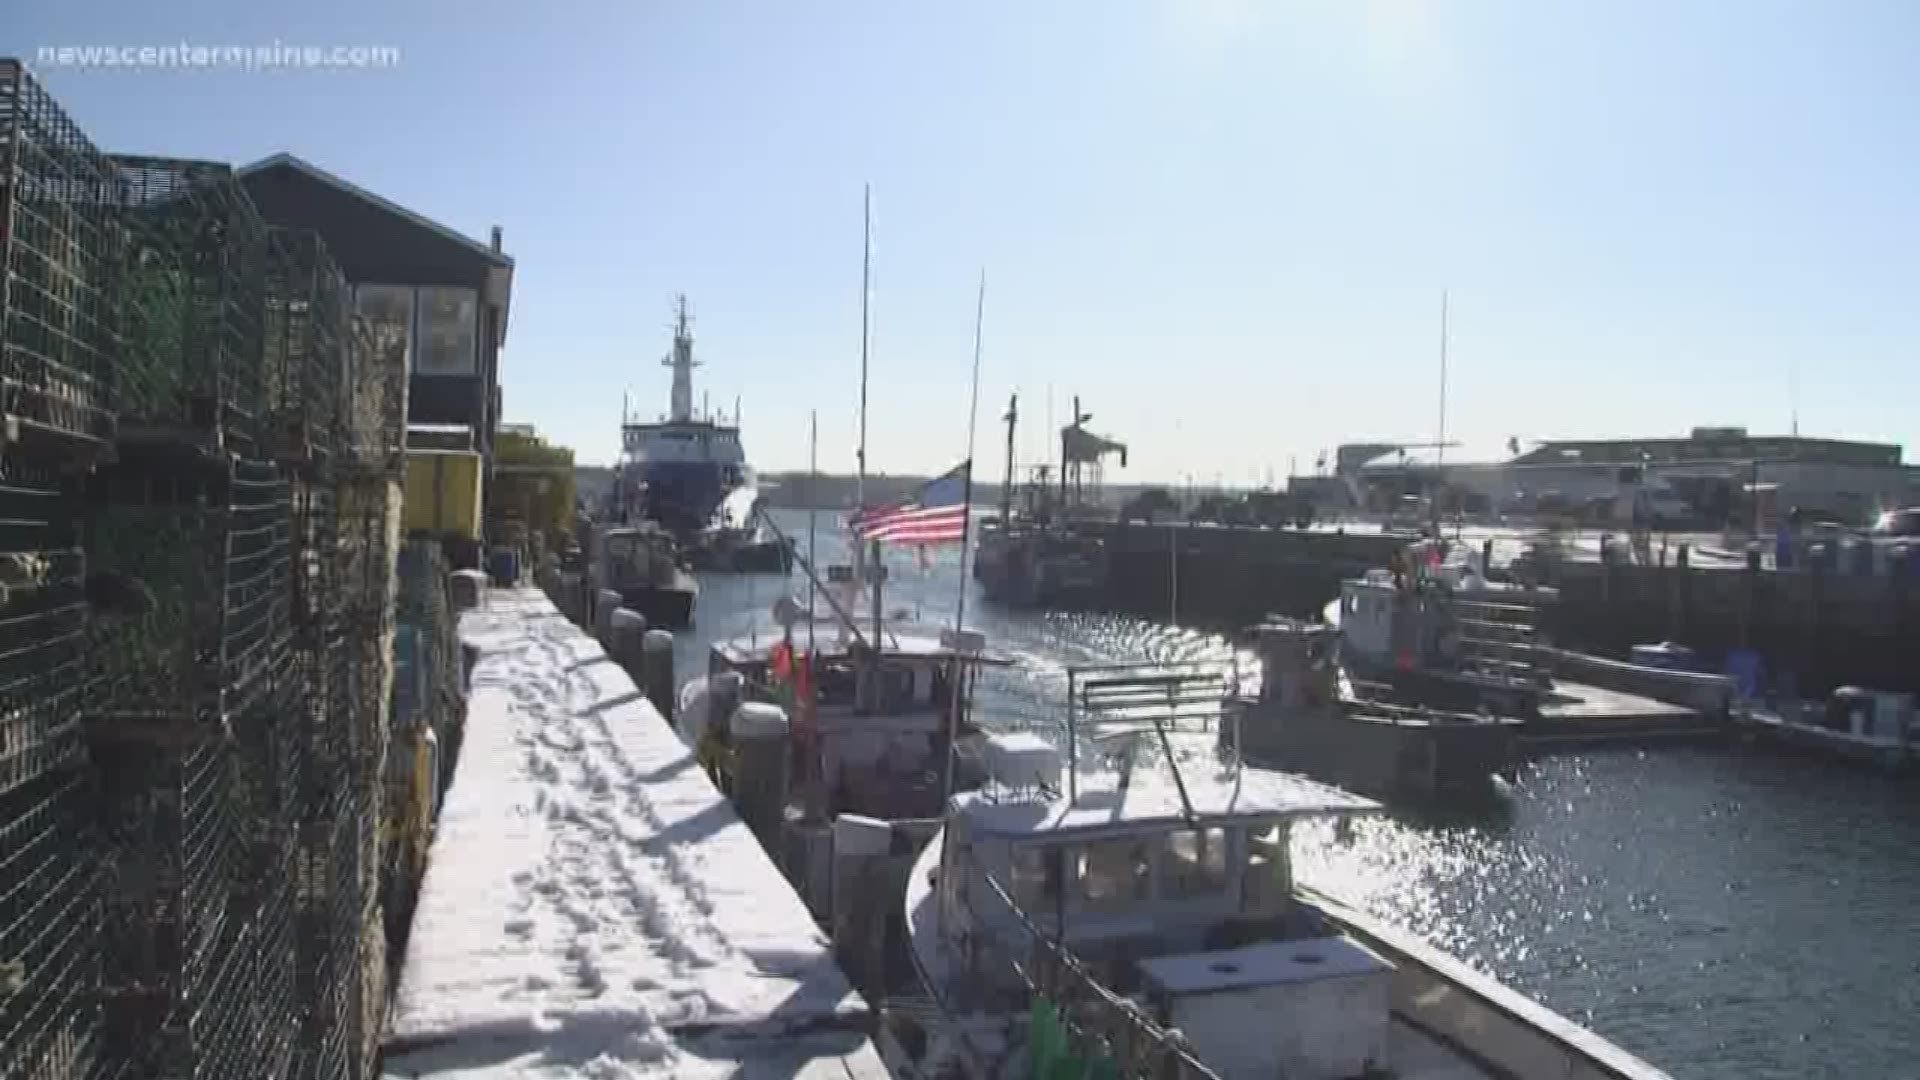 Leaders of Maine's largest city decide to freeze any new construction in an area fishermen have depended on for generations.
In a unanimous vote last night, Portland city council passed a 6-month moratorium -- and announced plans to create a task force.